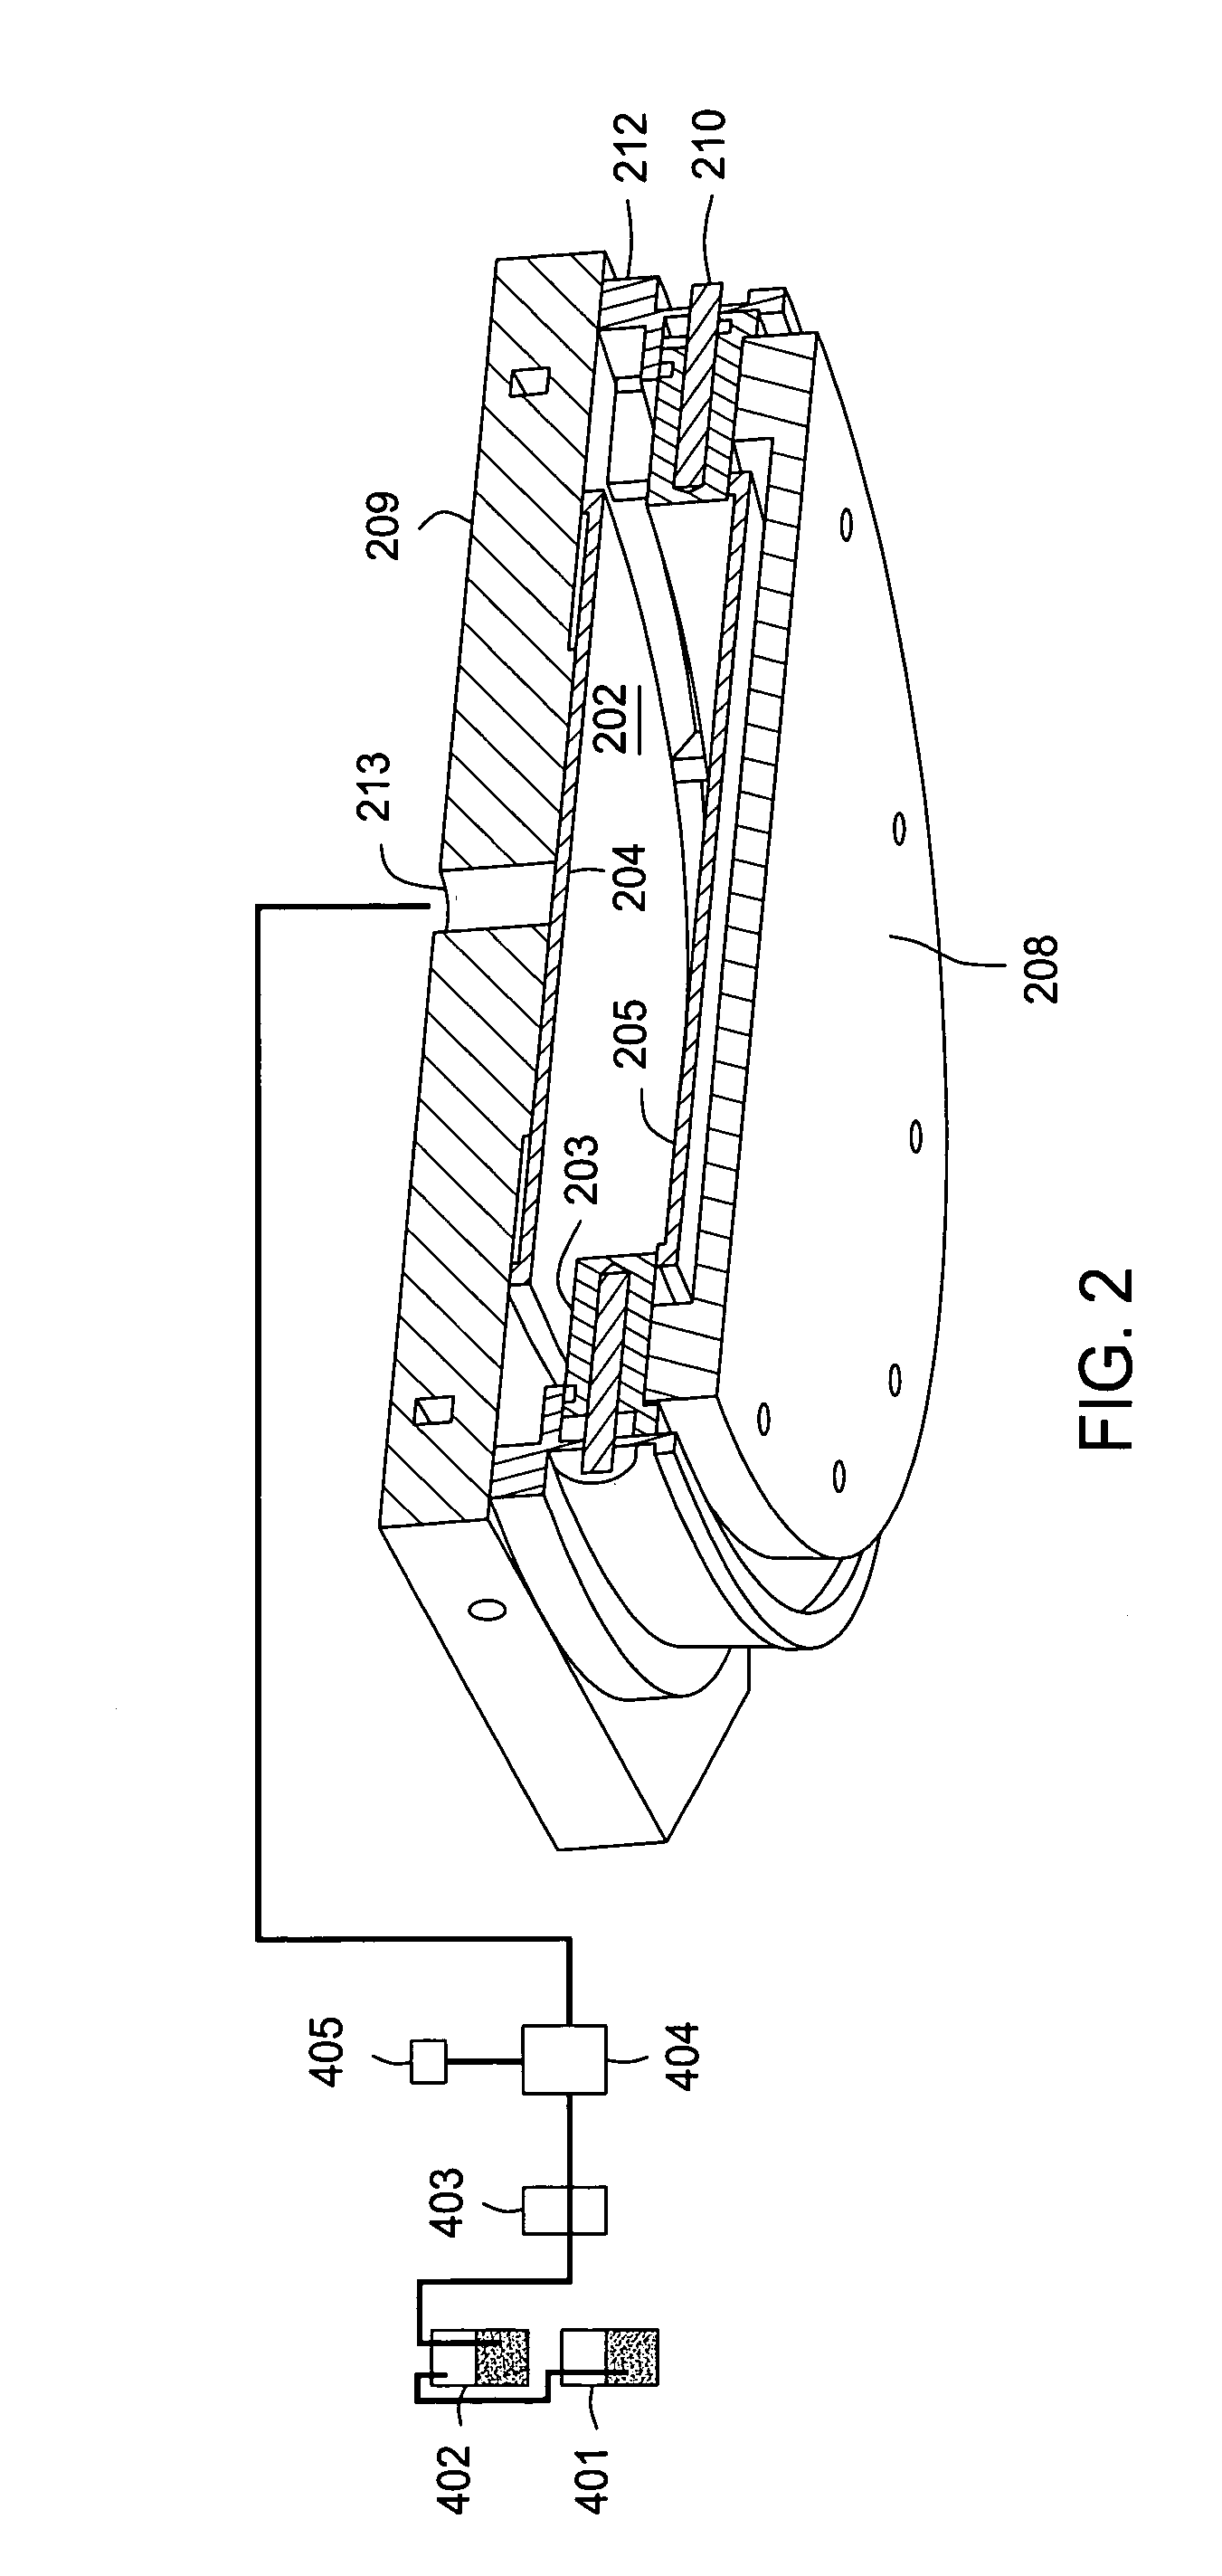 Apparatus and method for the deposition of silicon nitride films